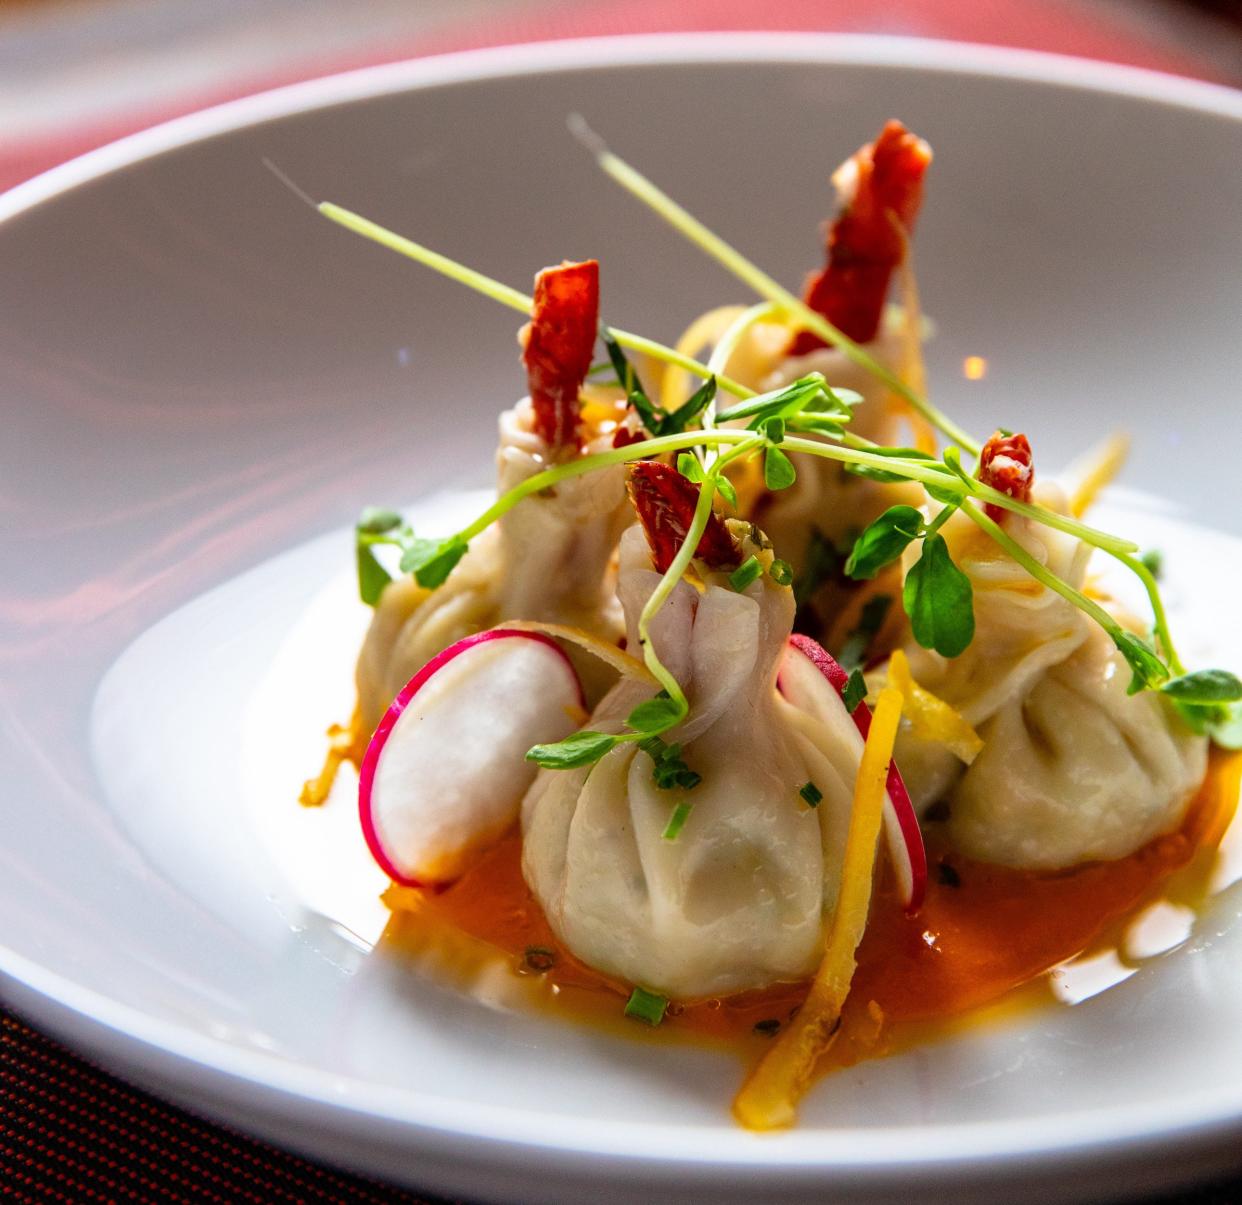 Chef David Burke's lobster dumplings. The New York star chef plans to open a restaurant in Lake Park.